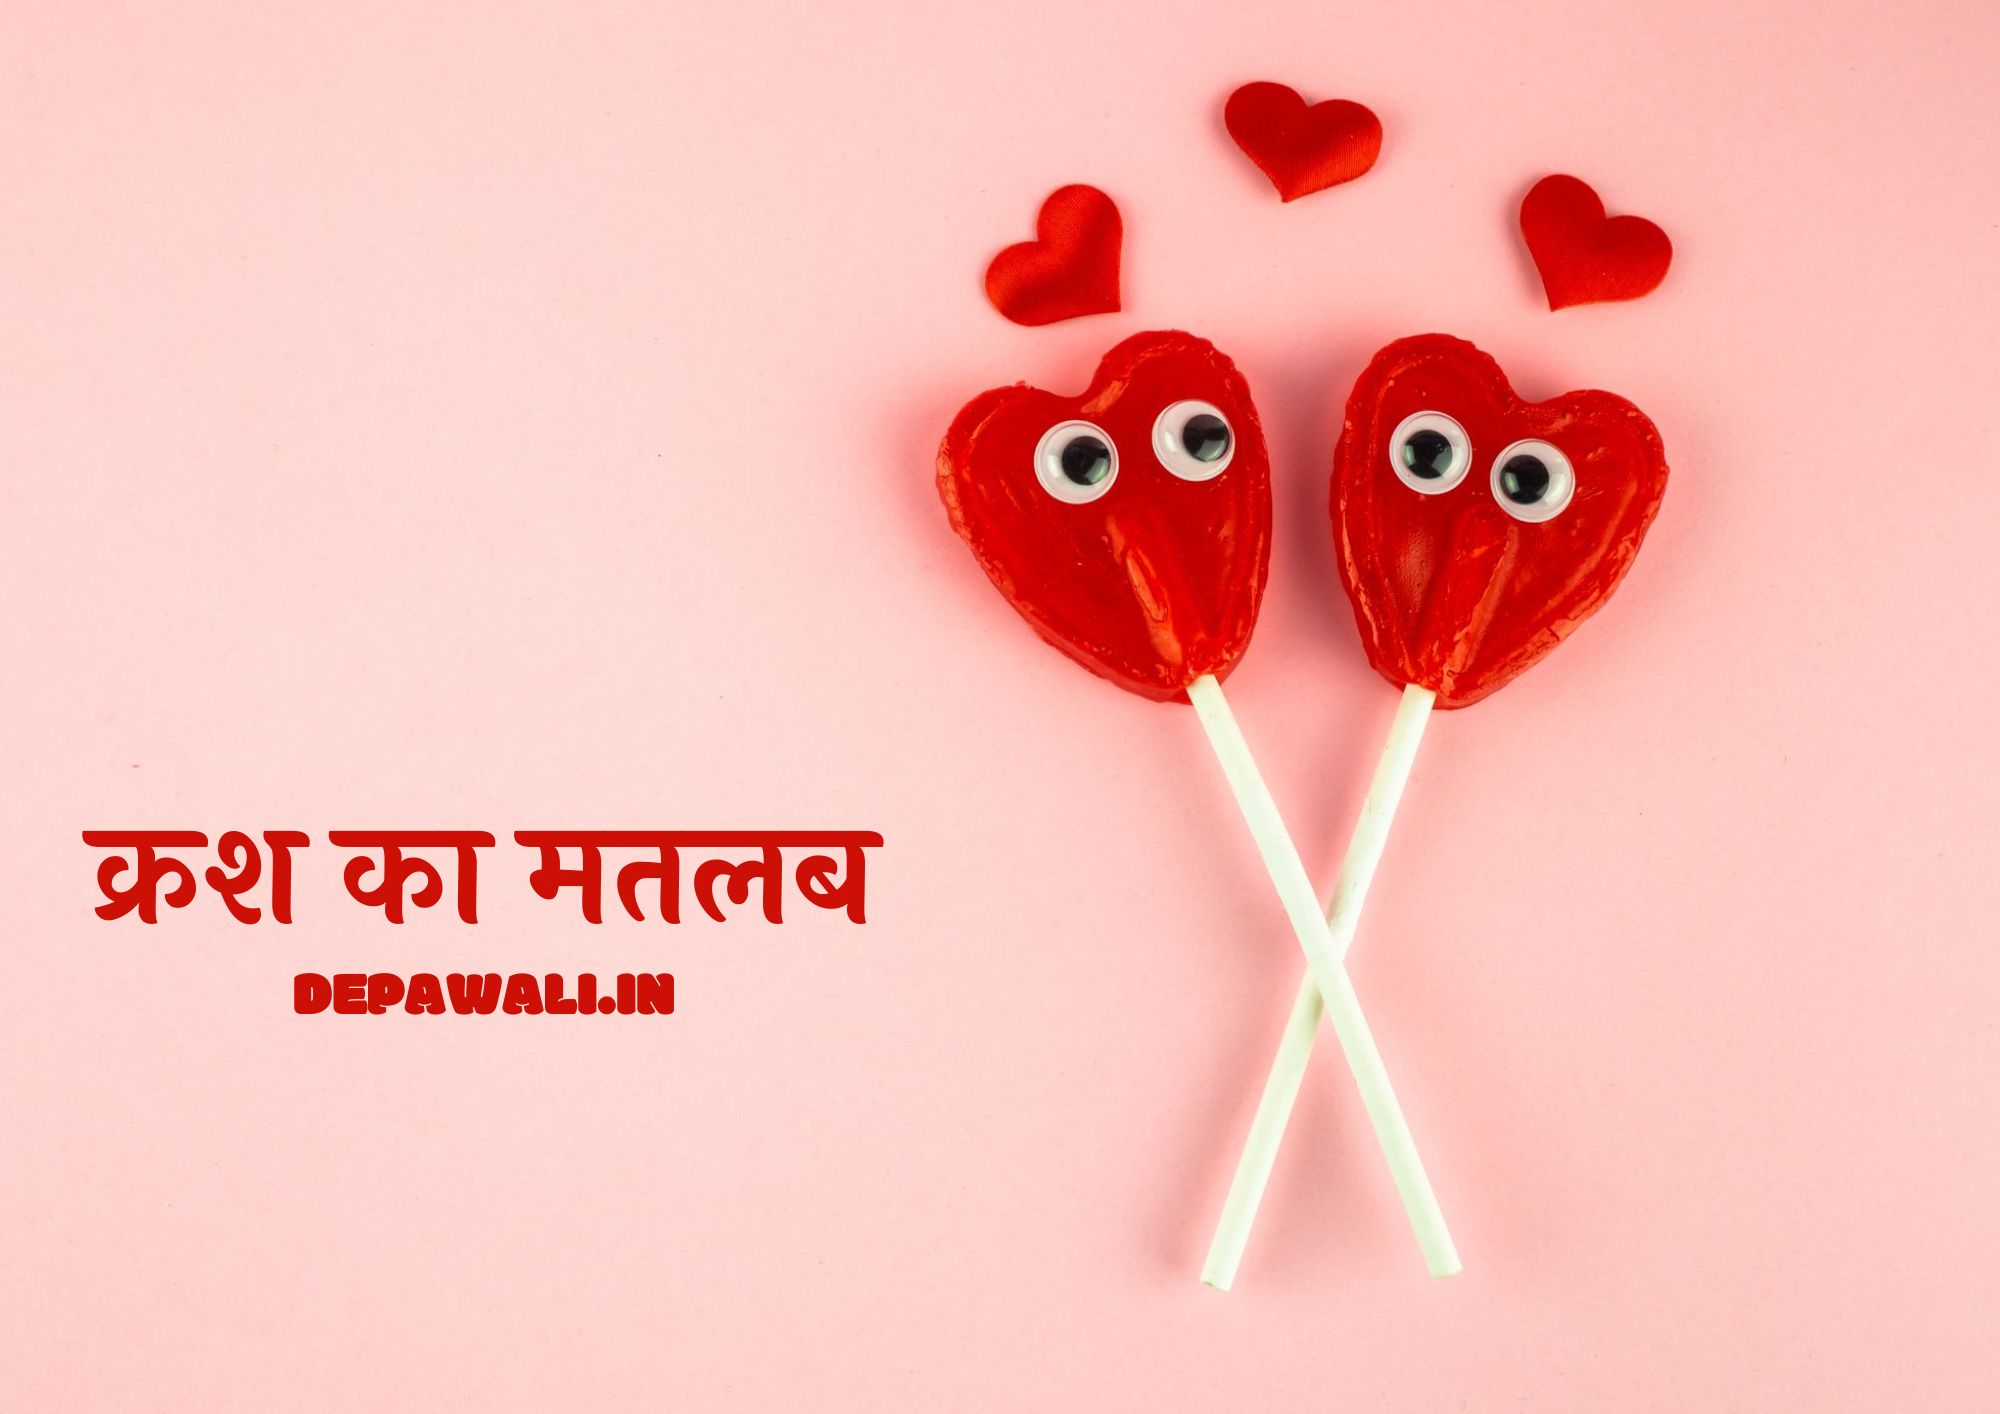 क्रश का मतलब क्या होता है, क्रश मीनिंग इन हिंदी, क्रश मीनिंग इन लव - Crush Meaning In Love - Crush Meaning In Hindi Related To Love